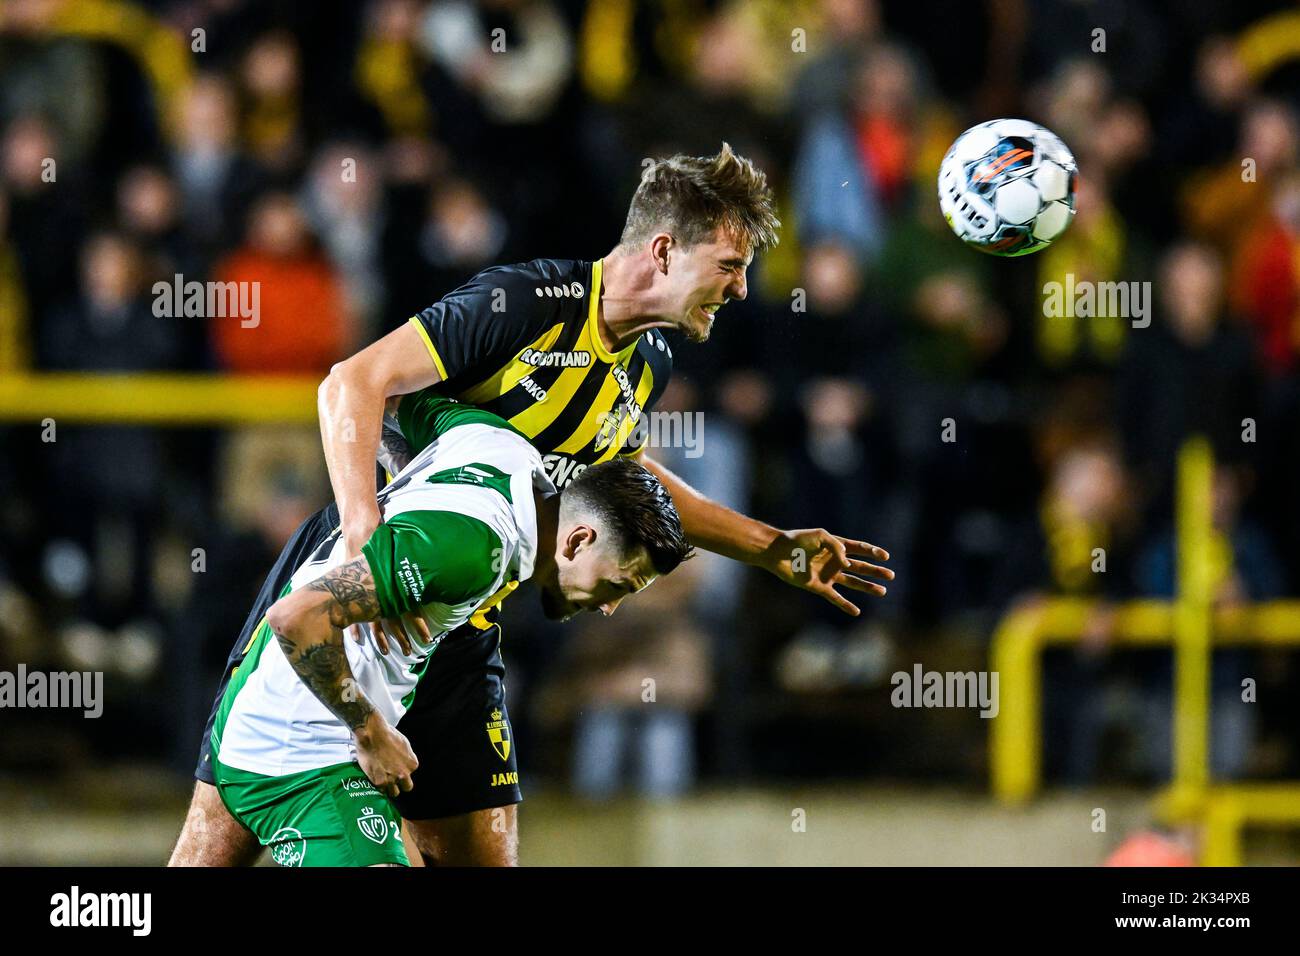 Racing's Gregory Carrez and Lierse's Toon Raemaekers pictured in action during a soccer game between Lierse Kempenzonen and Koninklijke Racing Club Mechelen, Saturday 24 September 2022 in Lier, in the fifth round of the 'Croky Cup' Belgian cup. BELGA PHOTO TOM GOYVAERTS Stock Photo